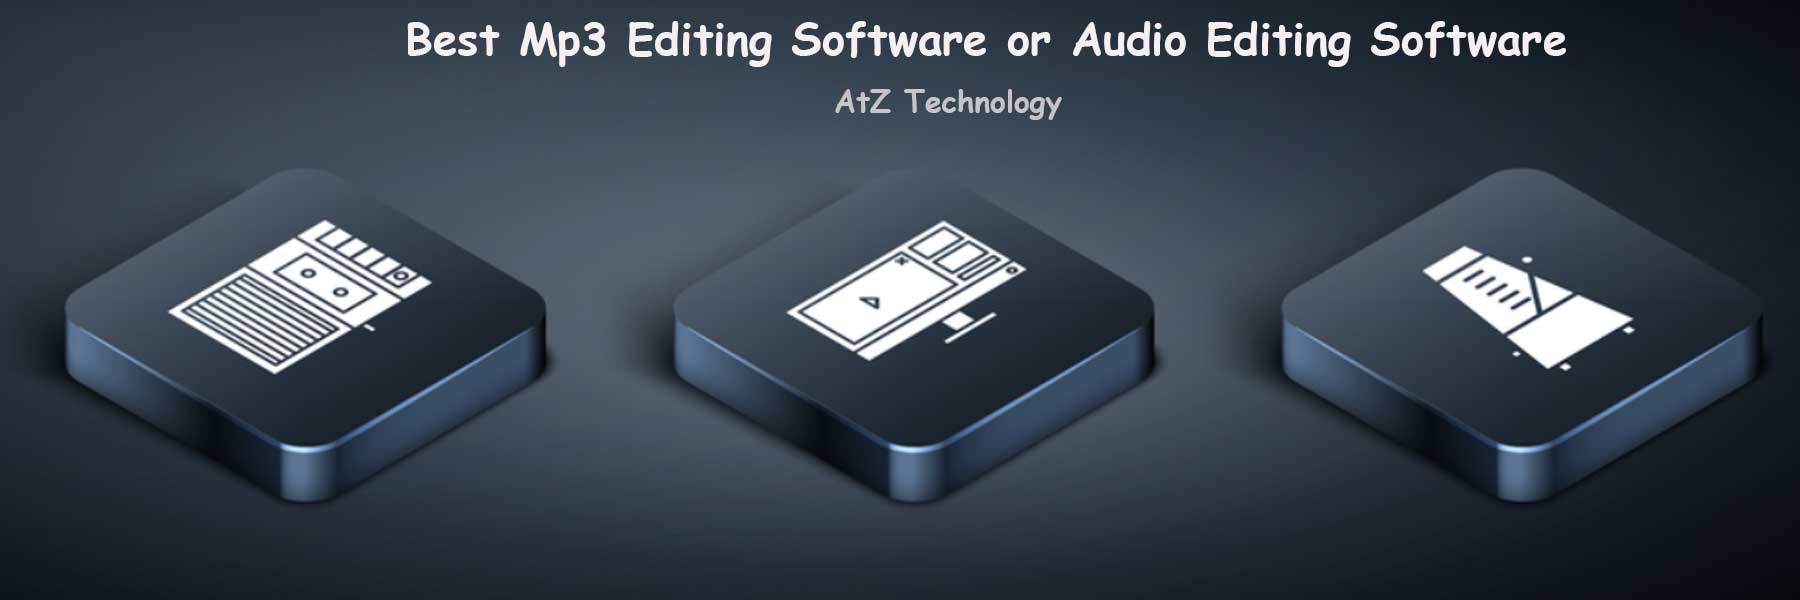 11 Best MP3 Editing Software or Audio Editing Software